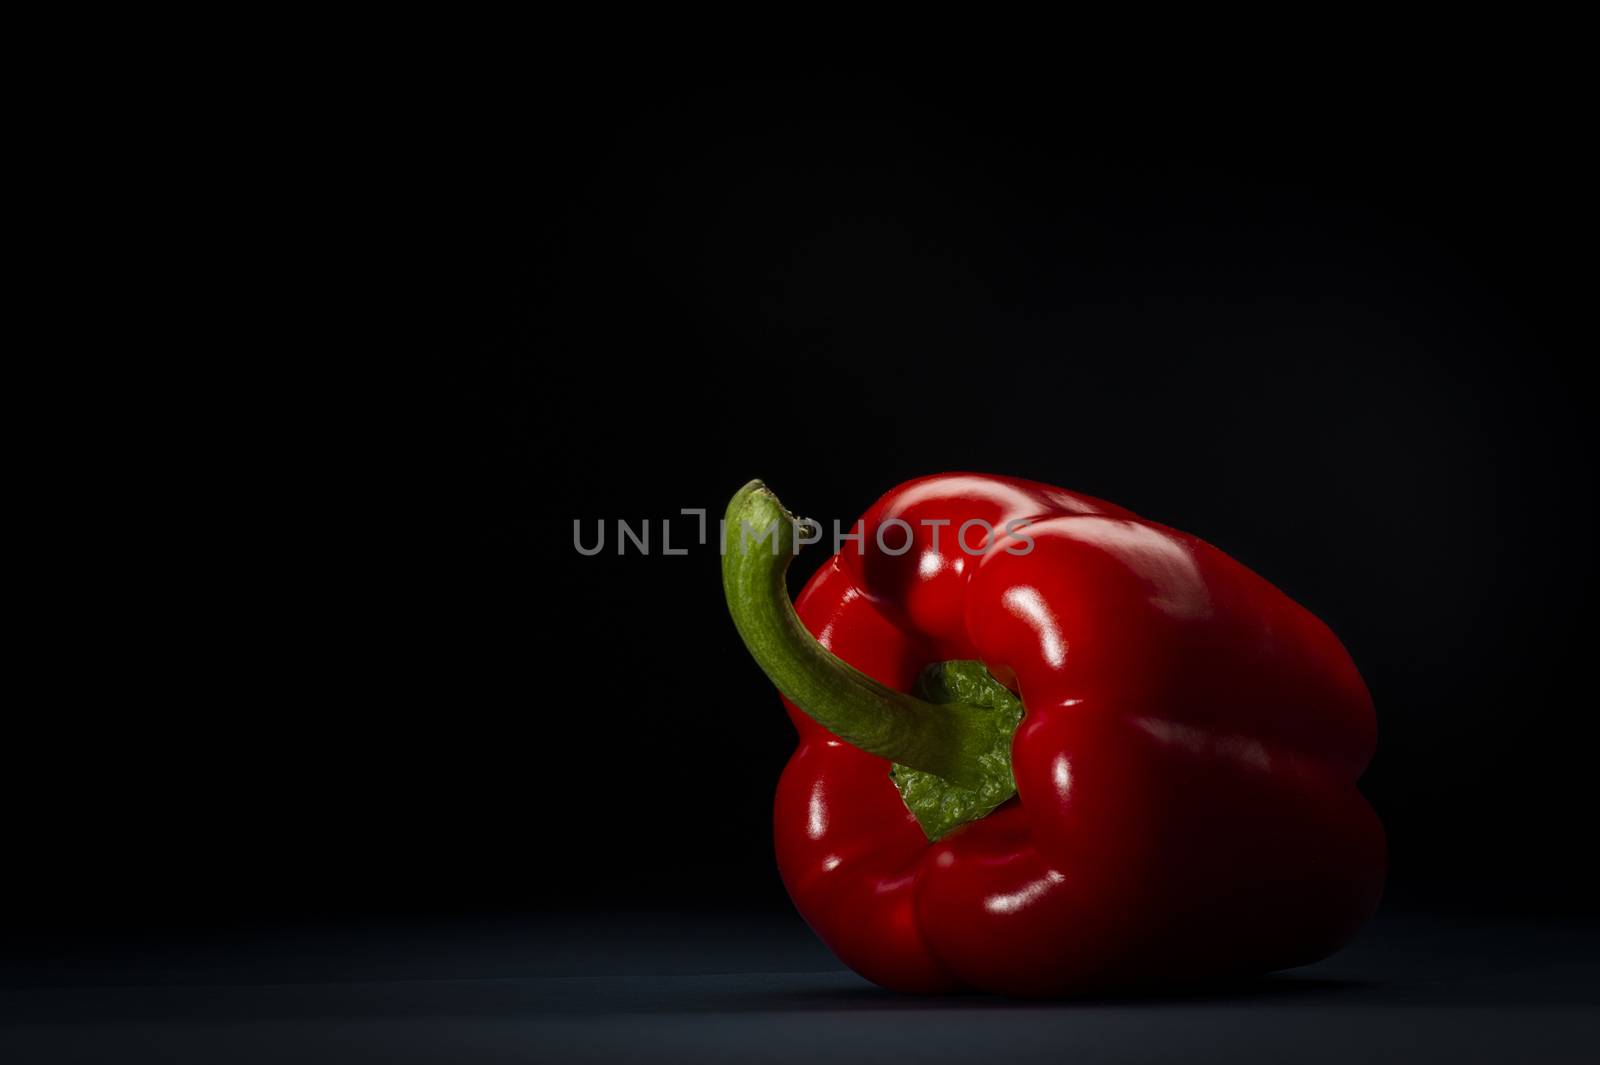 Fresh whole red bell pepper or capsicum rich in antioxidants and vitamin c used as a salad and cooking ingredient, viewed from the stalk end on a dark background with copyspace